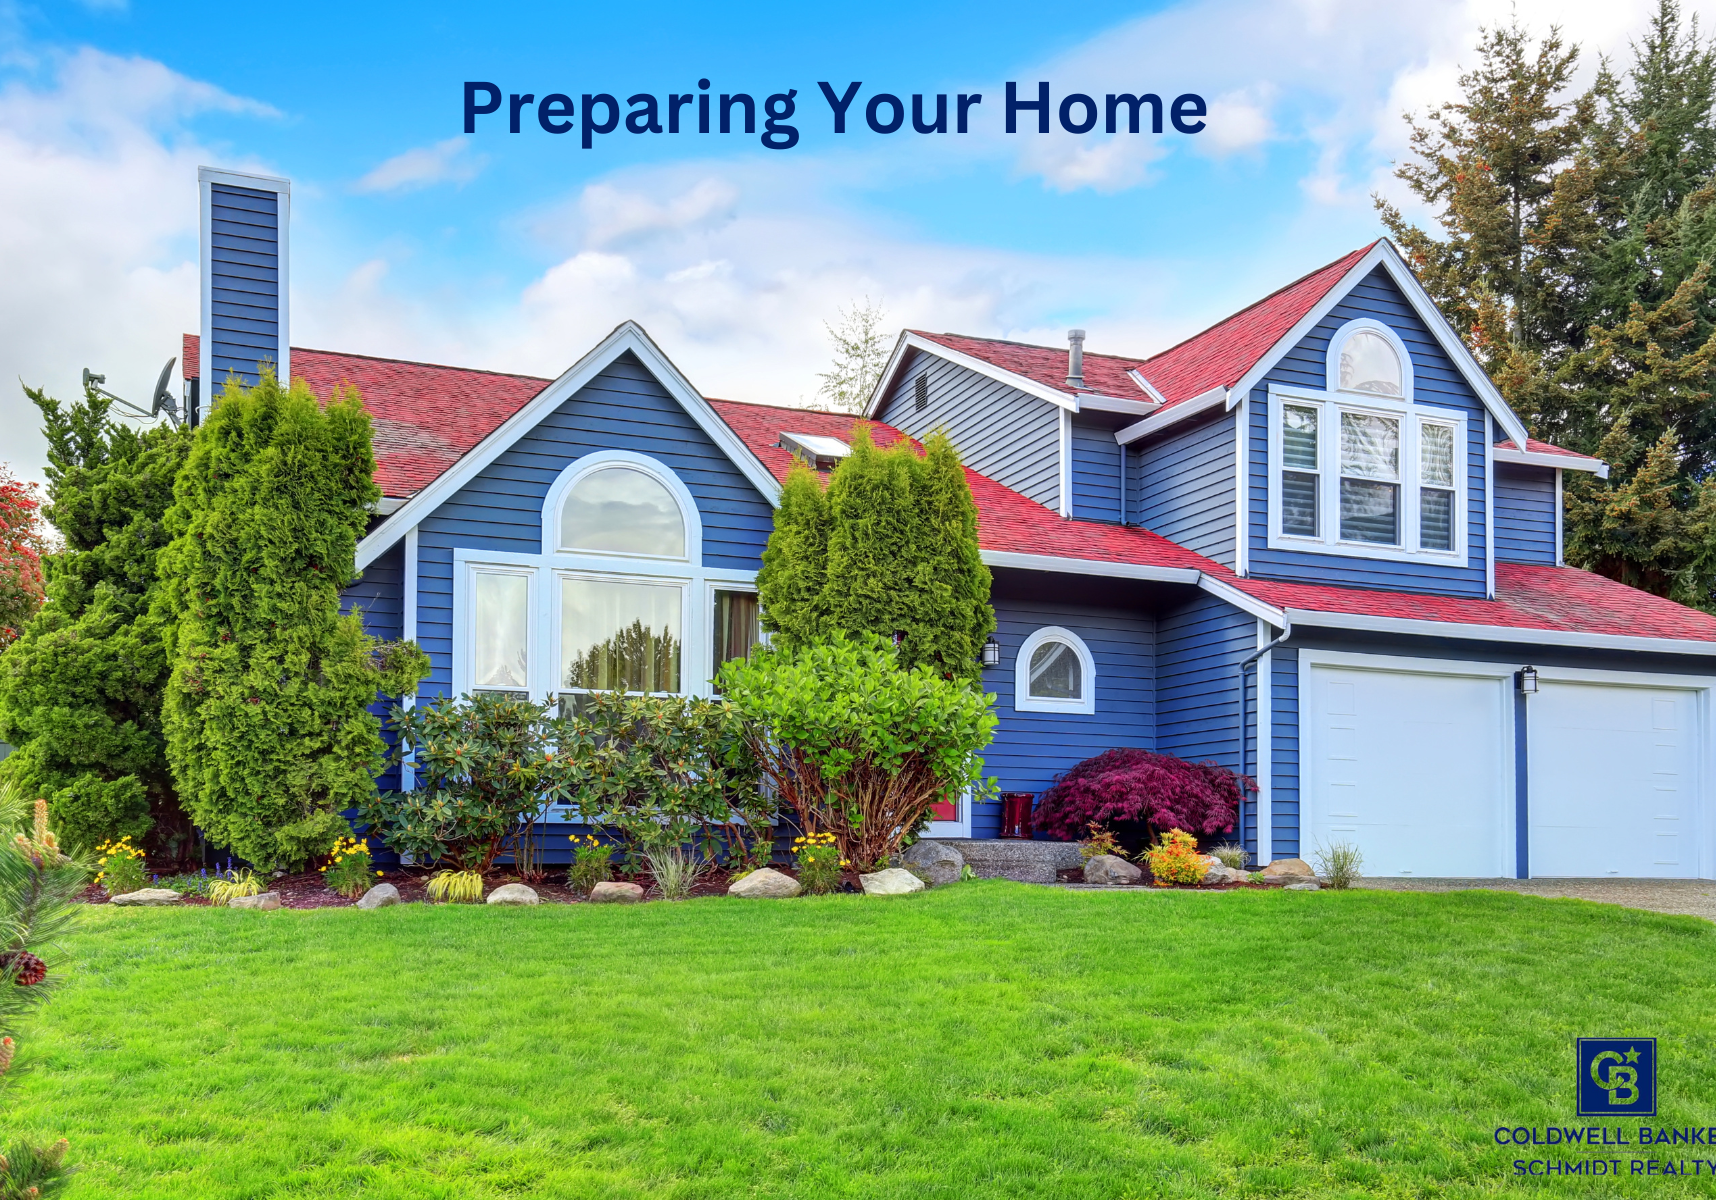 Preparing your home